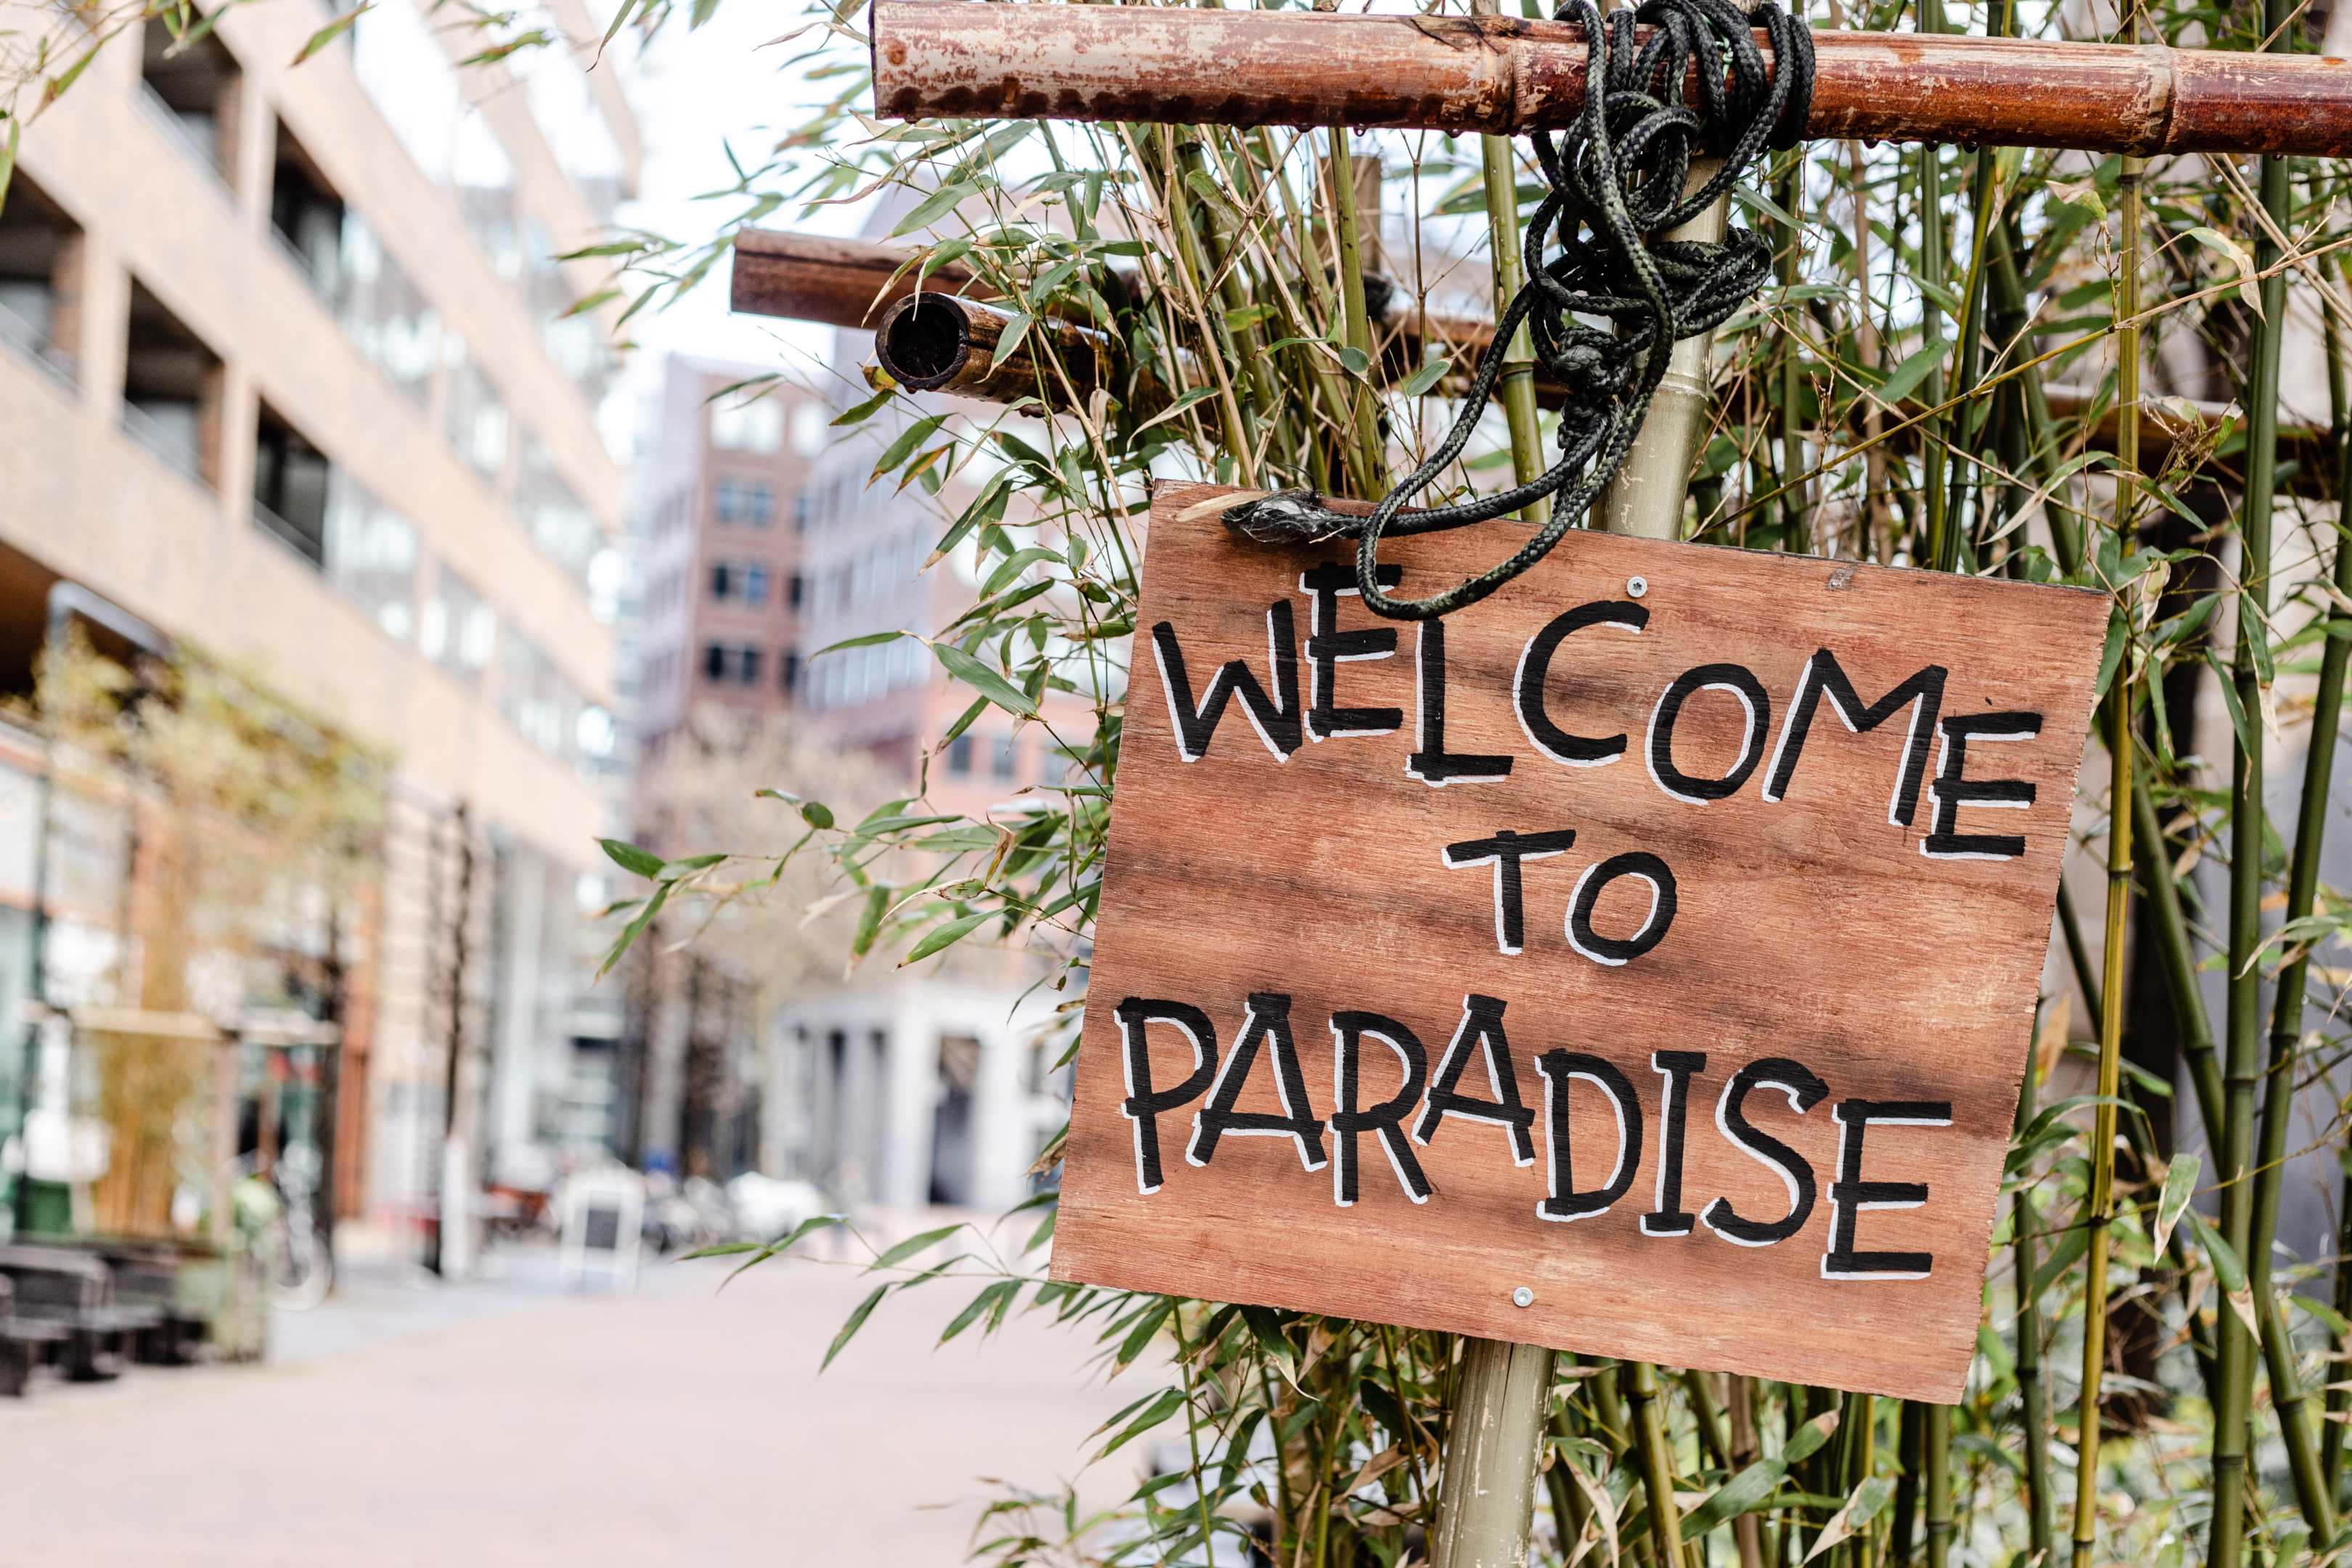 Photo of "Welcome to paradise" signage